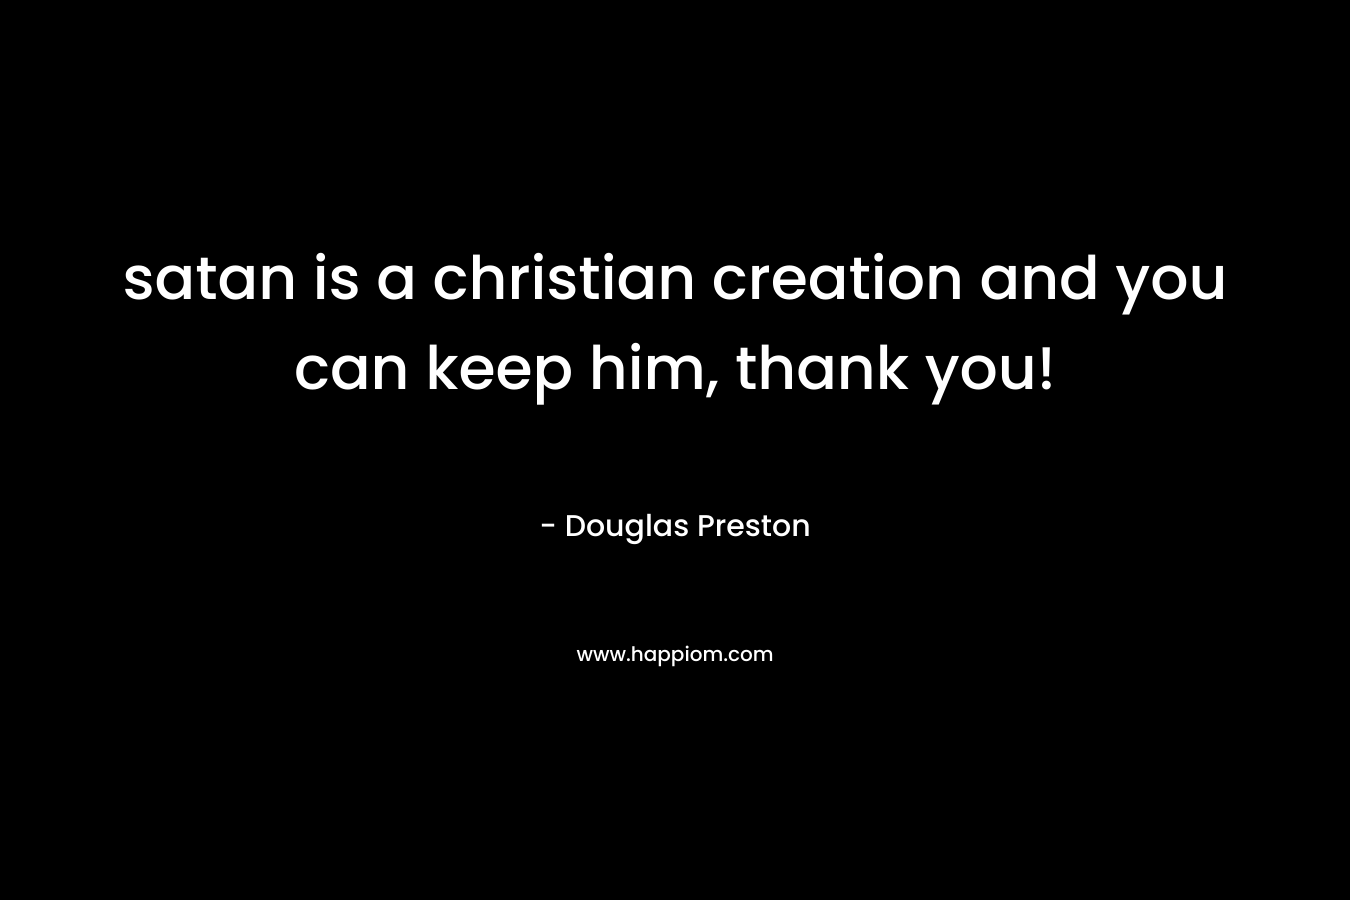 satan is a christian creation and you can keep him, thank you!